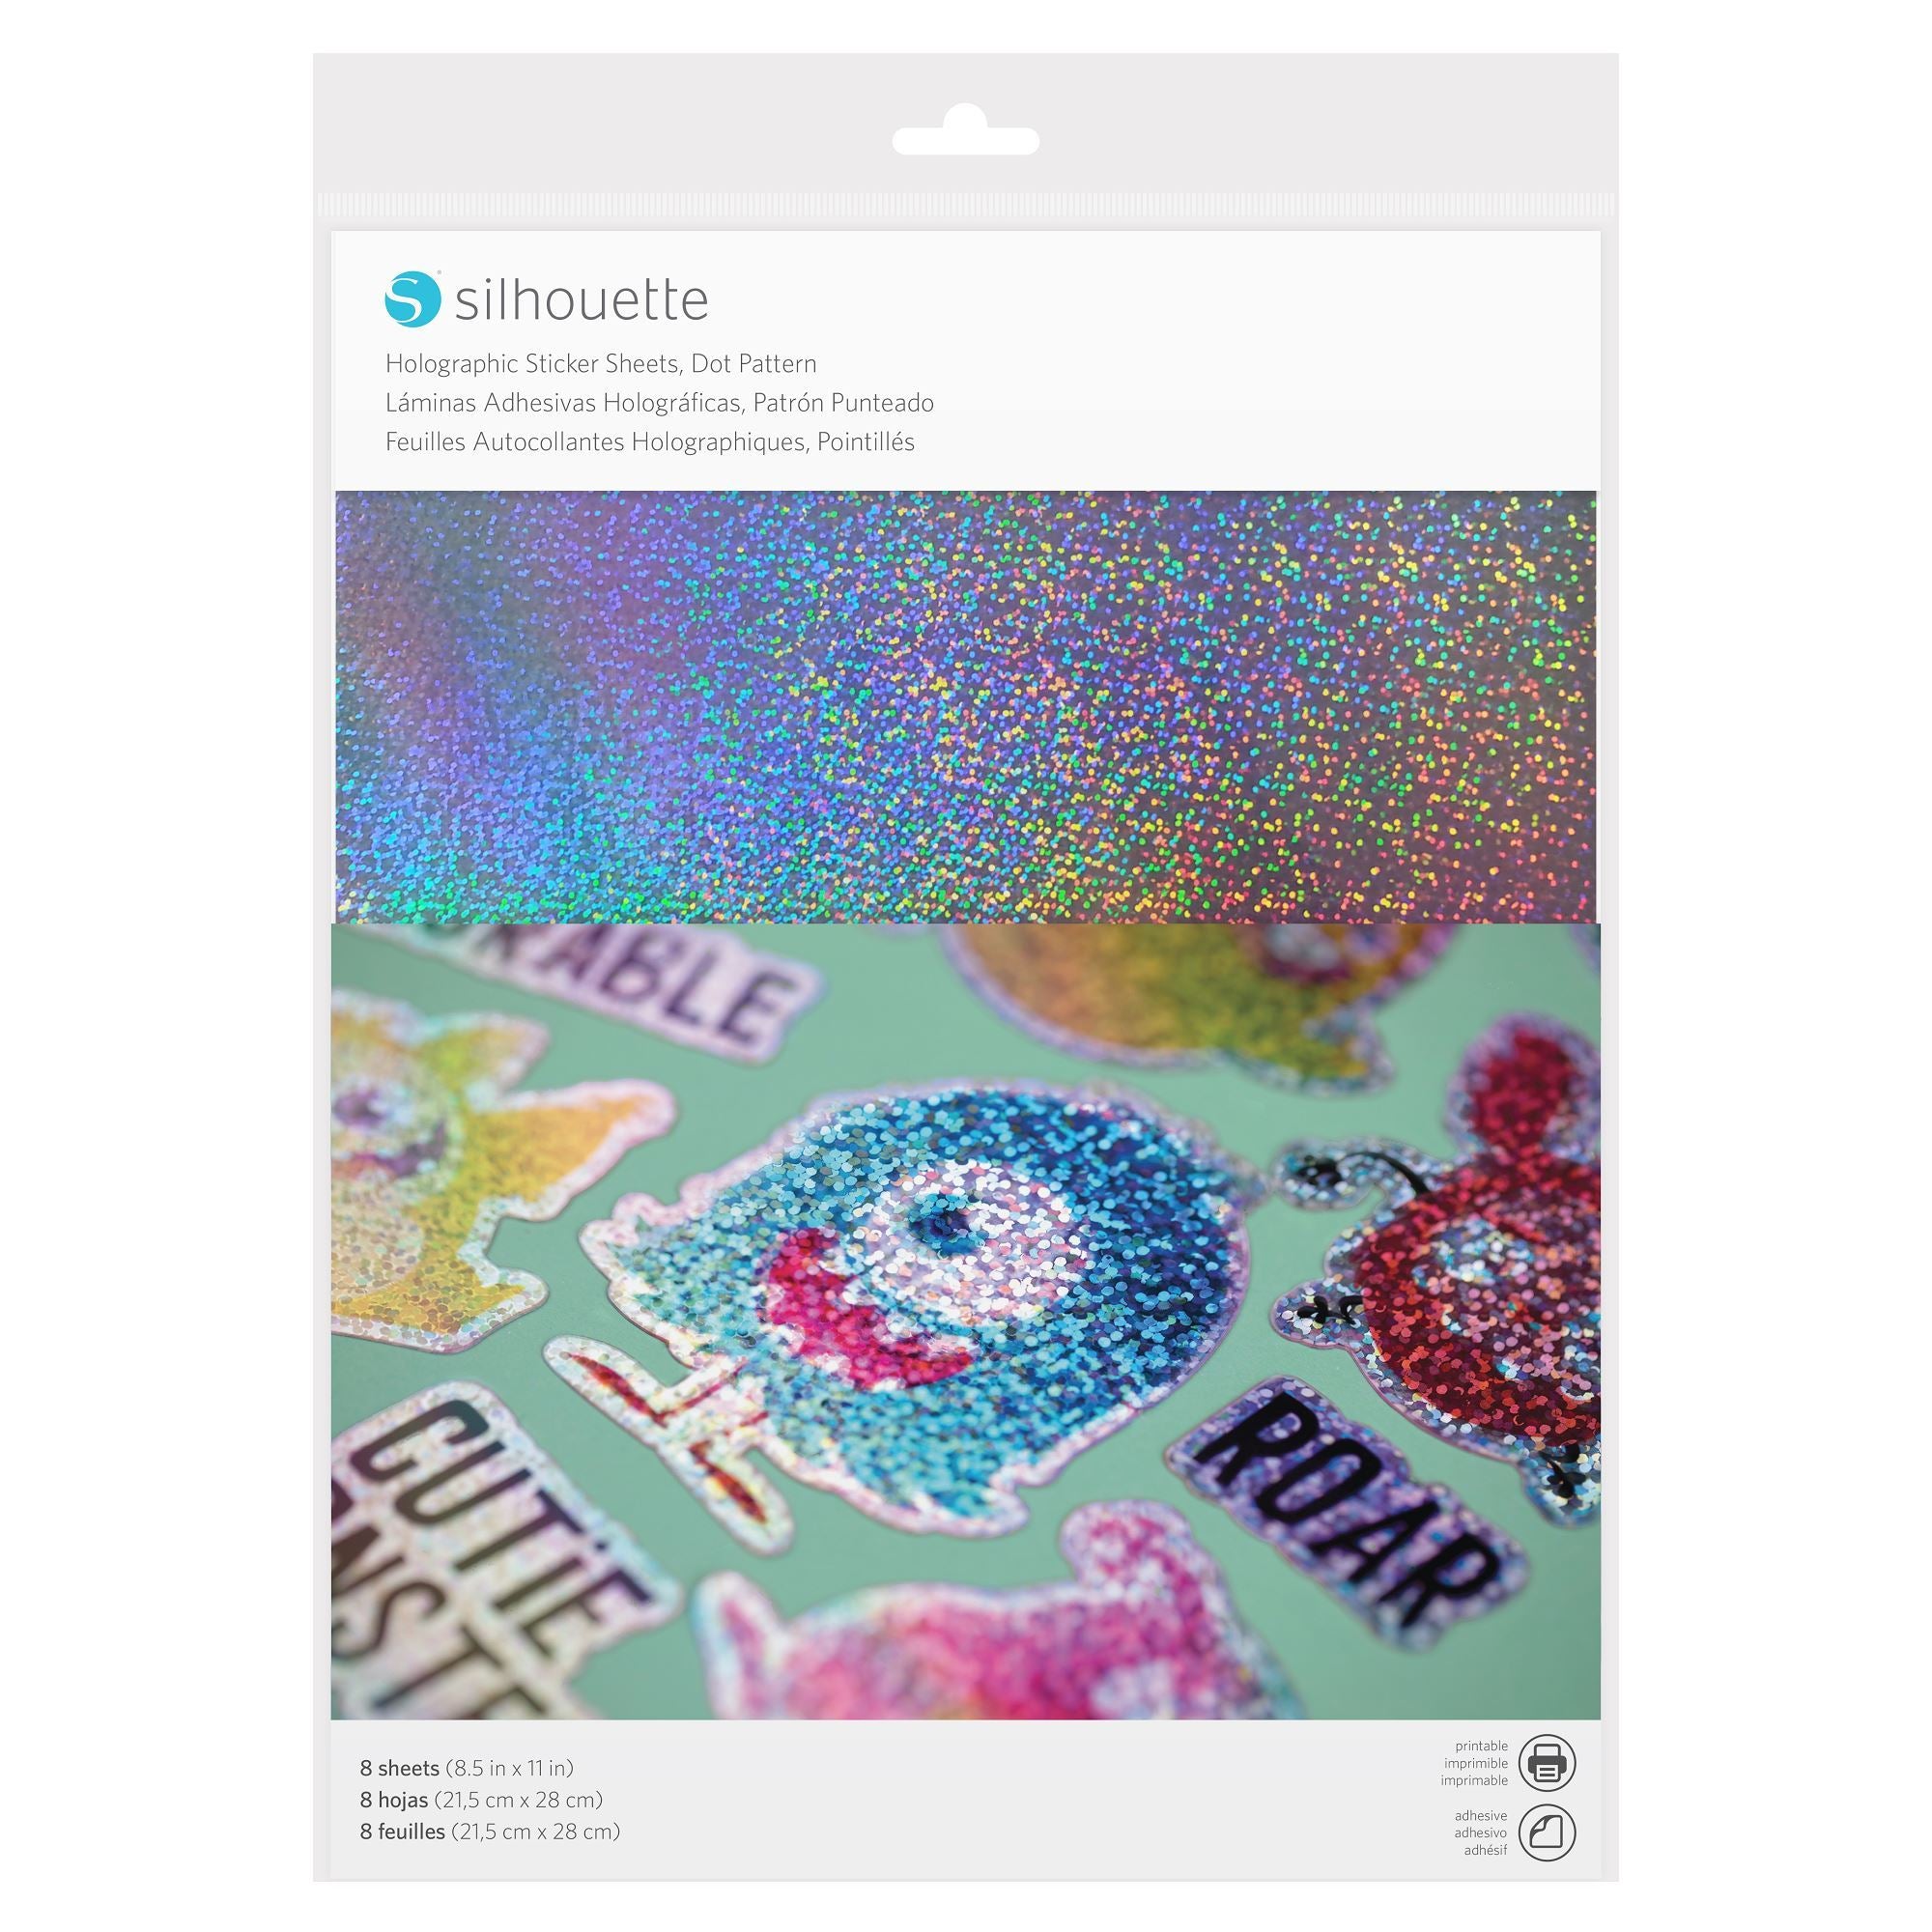 Silhouette Holographic Sticker Sheets Dot Pattern